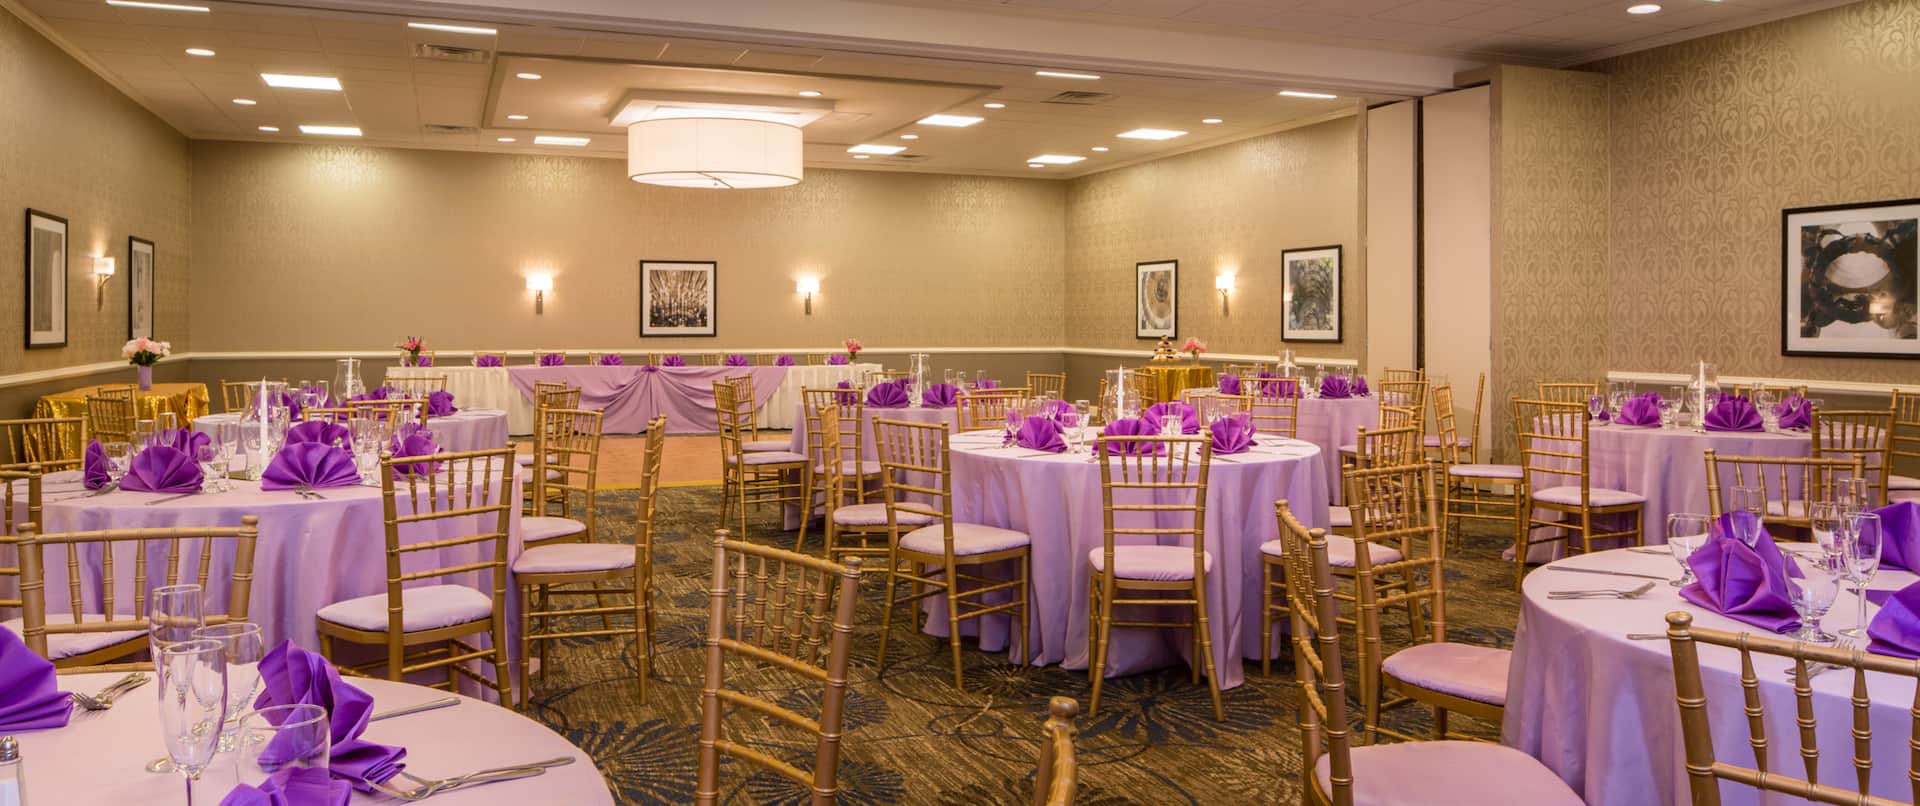 Round Tables With Place Settings, Purple Napkins, and Candles on White Linens, Dance Floor, and Head Table in Event Space